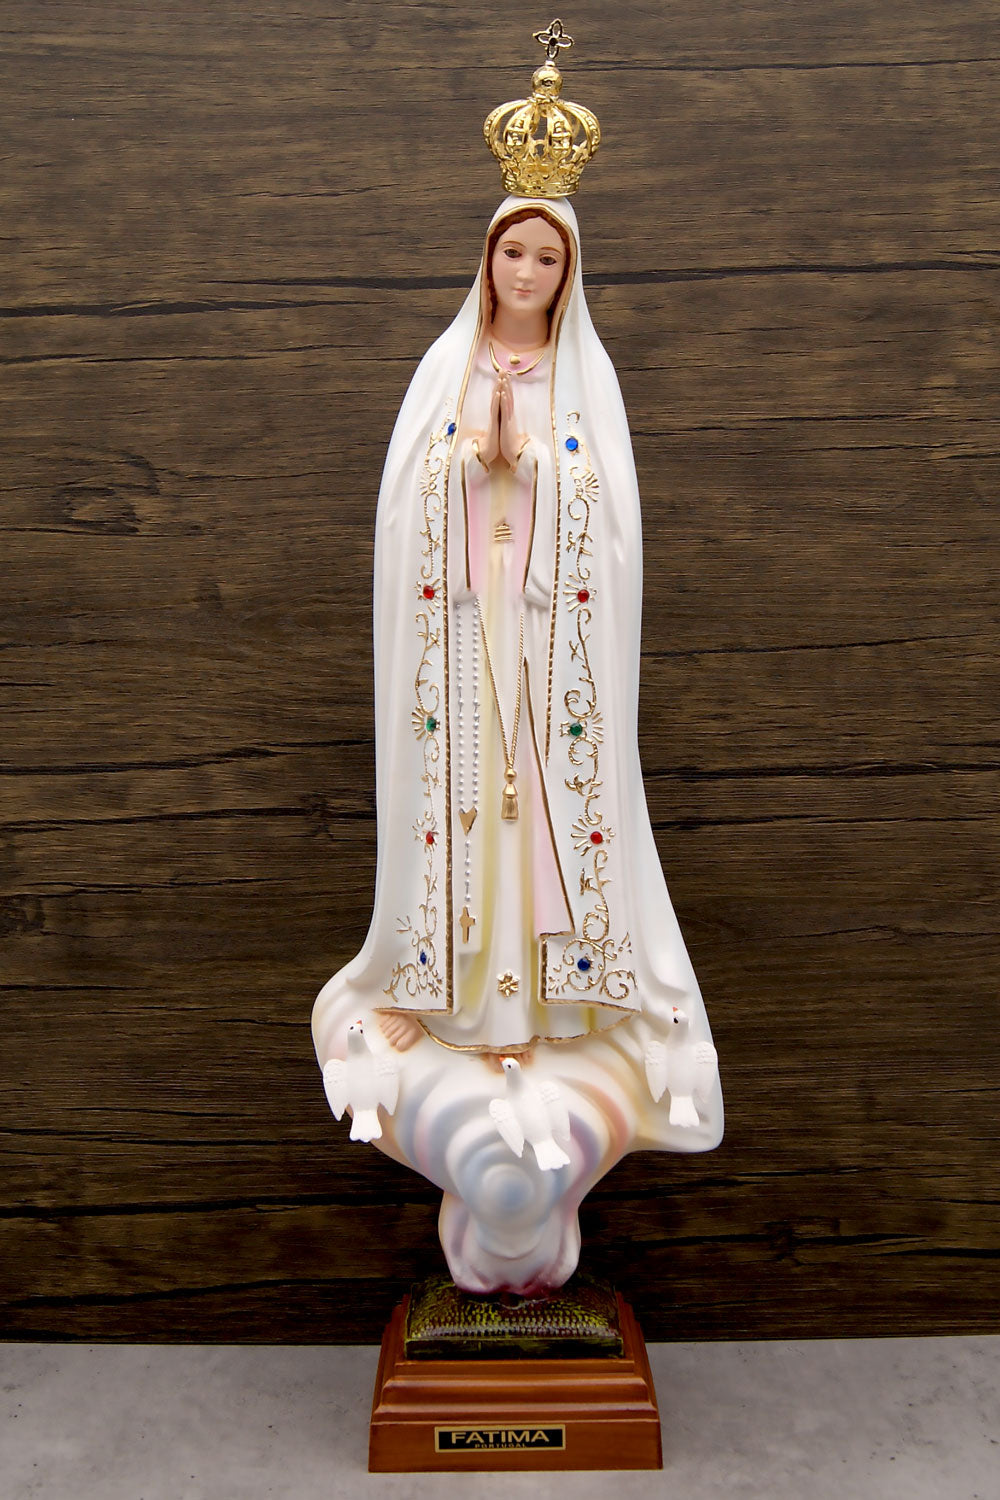 20 Inch Glass Eyes Our Lady of Fatima Statue Made in Portugal